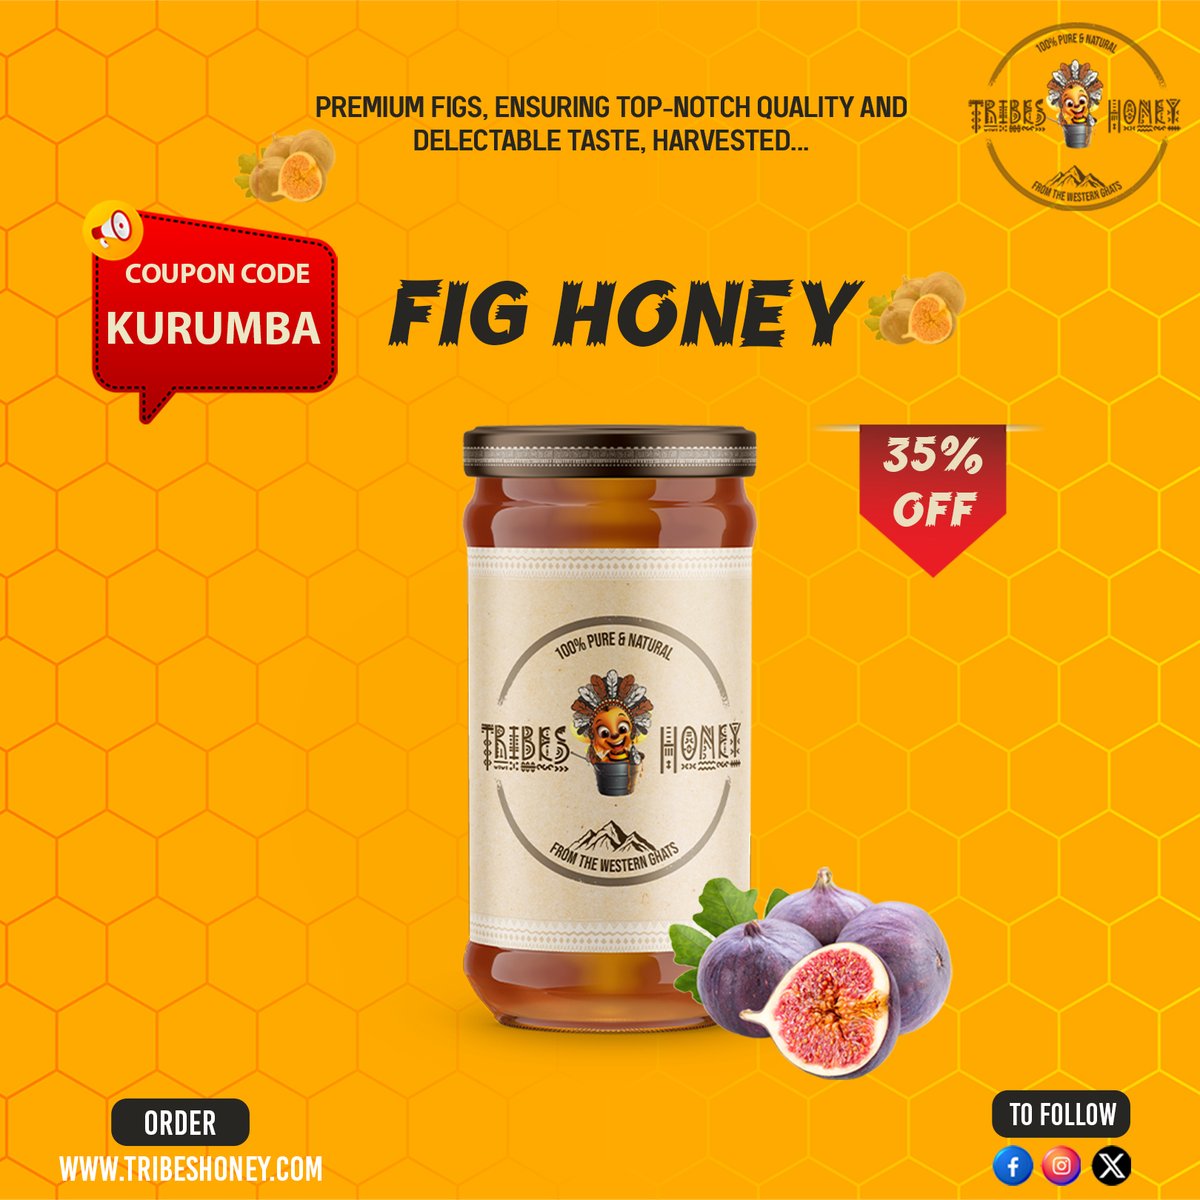 Indulge in Nature's Sweetness with FIG HONEY from Tribes Honey 🍯✨ 

#TribesHoney #FigHoney #OrderNow #NaturalGoodness